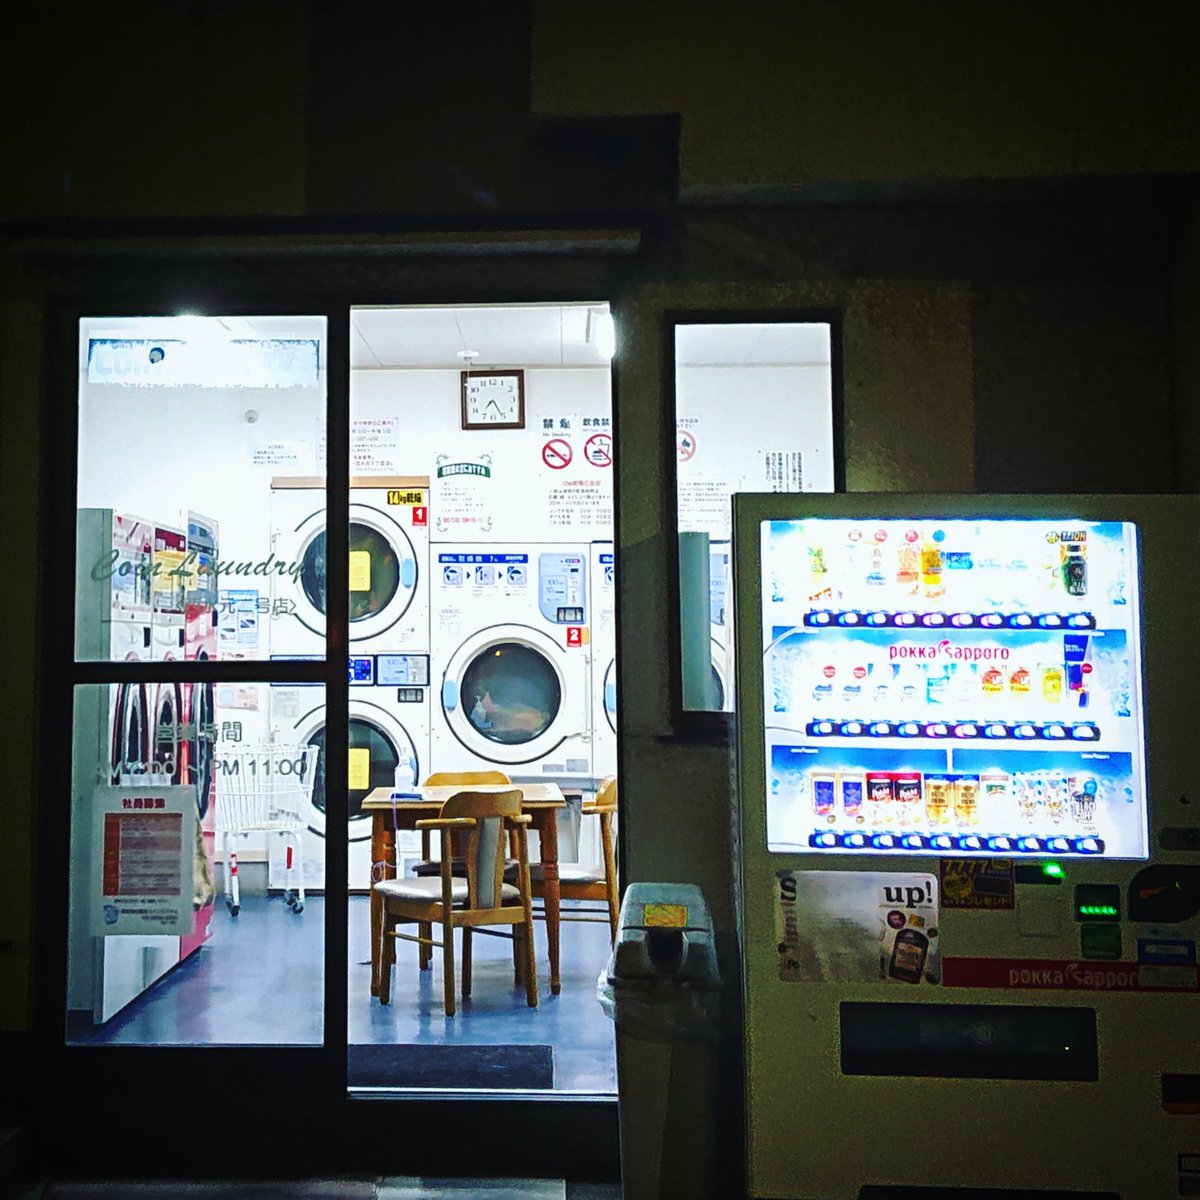 「night coin laundry」

 いかす下町の
 コインランドリー。

#photograph #tokyo
#фотографія #sony
#xperia #コインランドリー
#사진 #照片 #фотография
#coinlaundry  #laundry